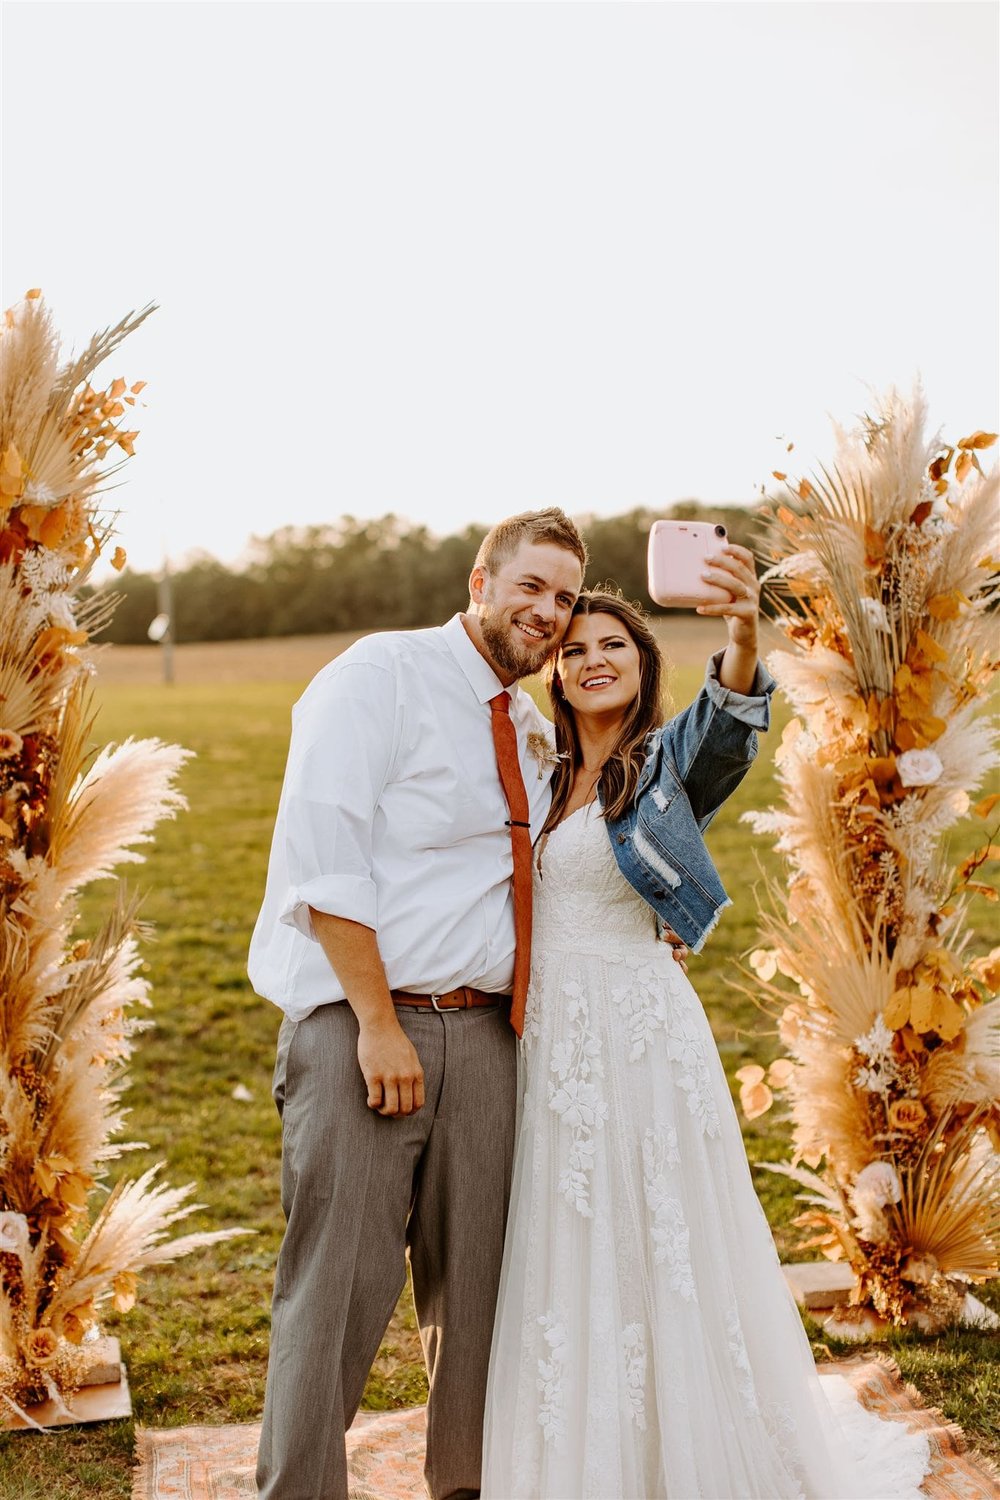  hannah and lance smile for a polaroid selfie in front of their boho dried floral wedding arbor 